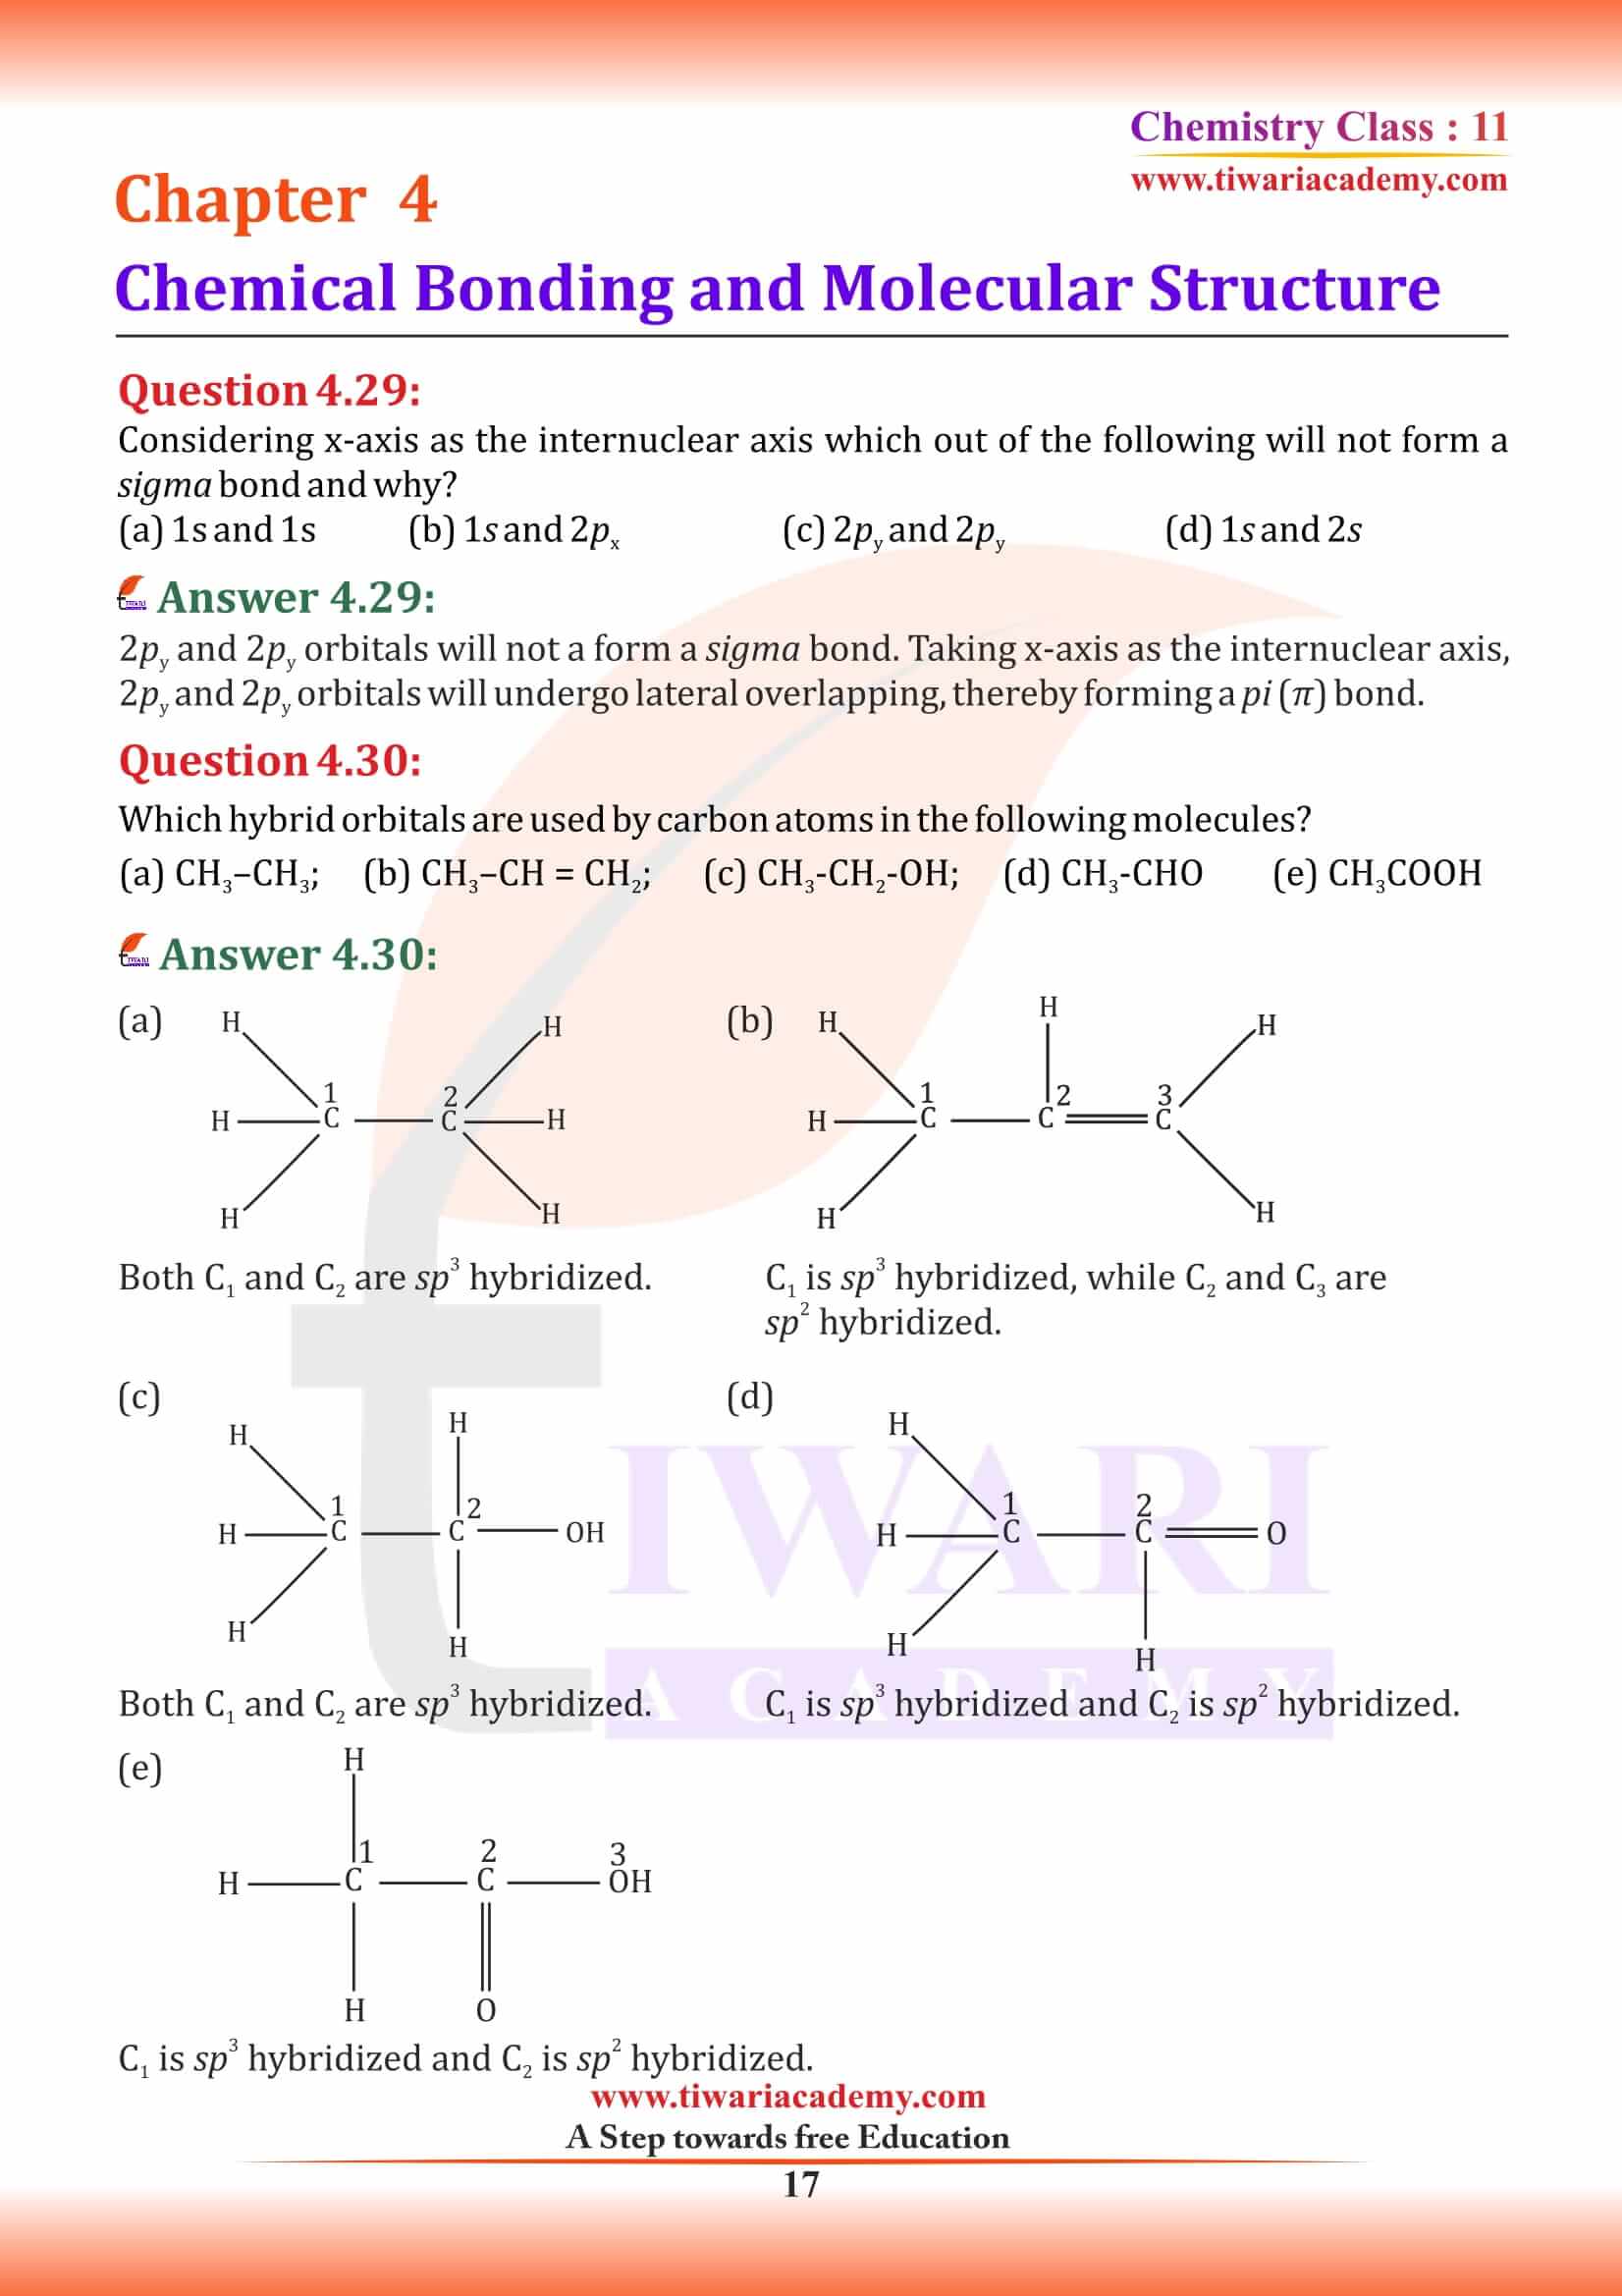 Class 11 Chemistry Chapter 4 intext question answers